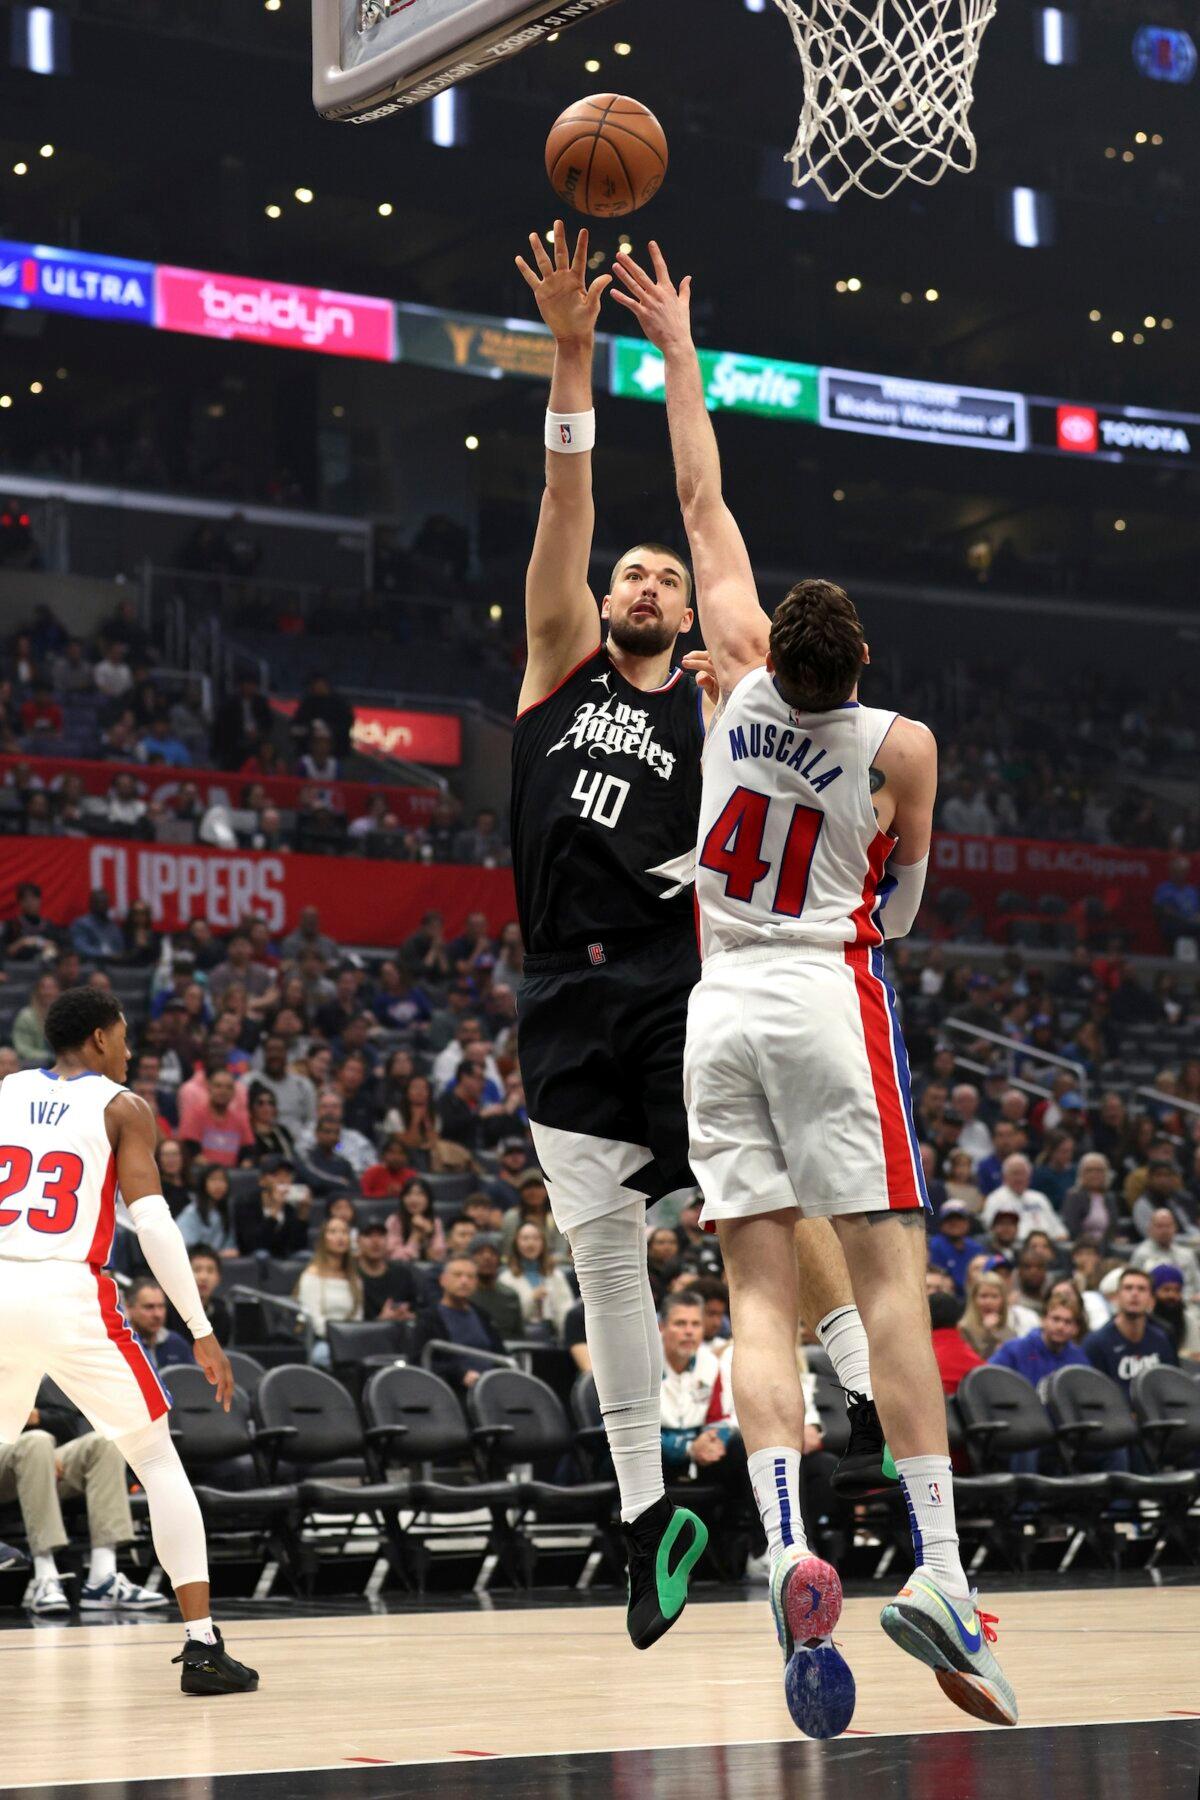 Los Angeles Clippers center Ivica Zubac (40) shoots over Detroit Pistons center Mike Muscala (41) during the first half of an NBA basketball game in Los Angeles on Feb. 10, 2024. (Raul Romero Jr./AP Photo)